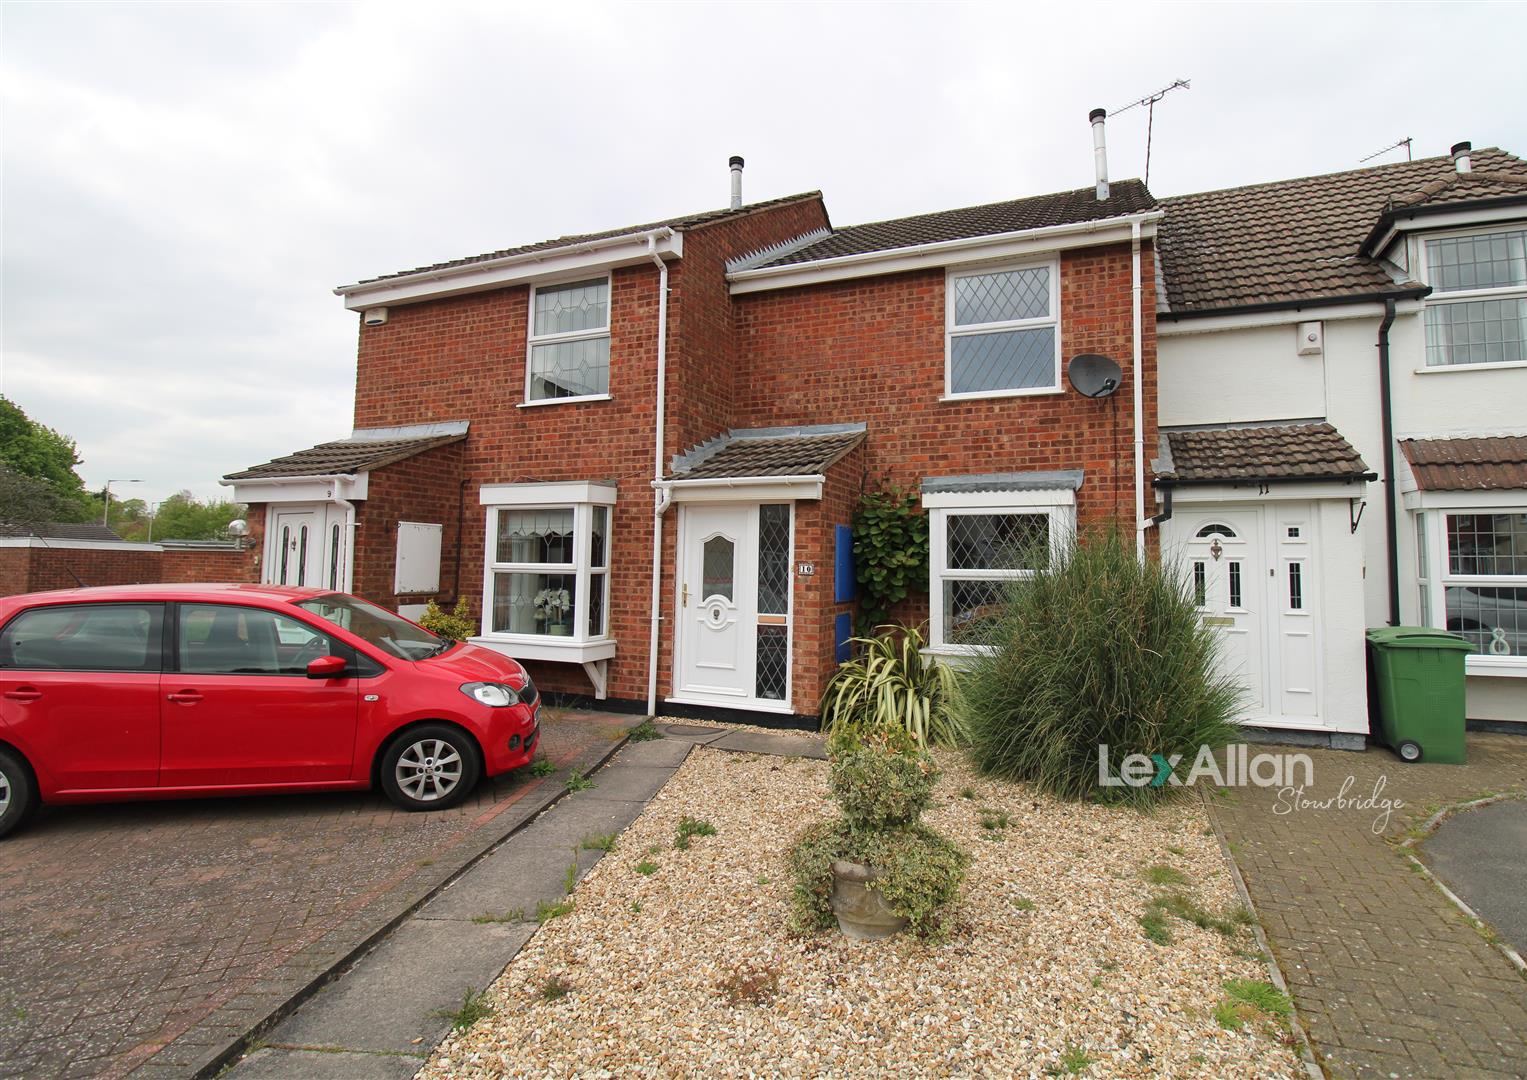 2 bed  for sale in Monkswell Close, Brierley Hill, DY5 